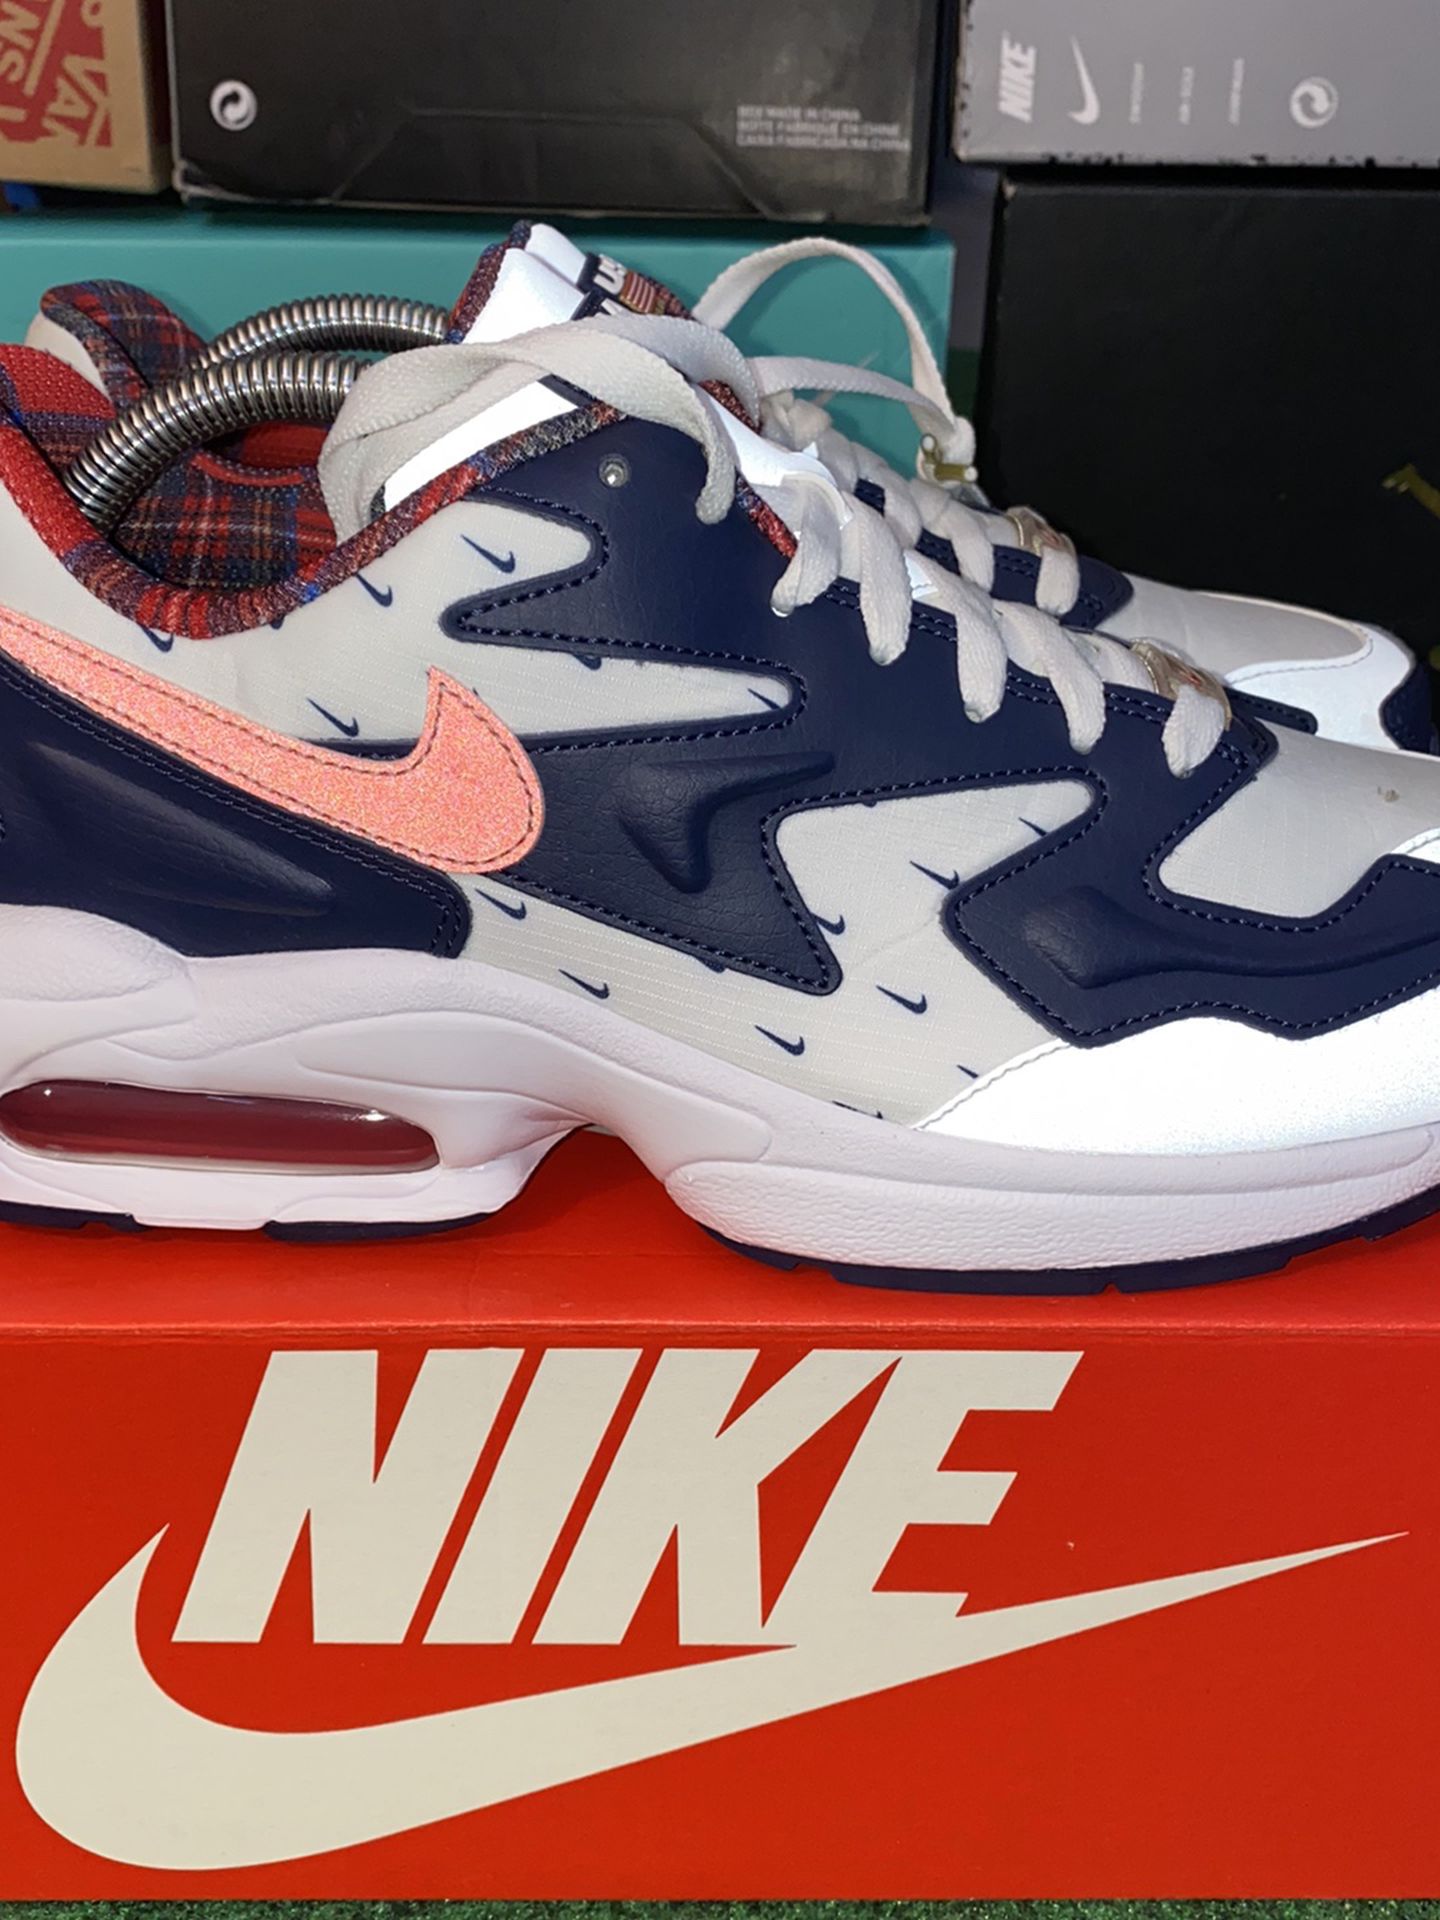 Nike Air Max 2 Light “USA” (Deadstock) Size 9